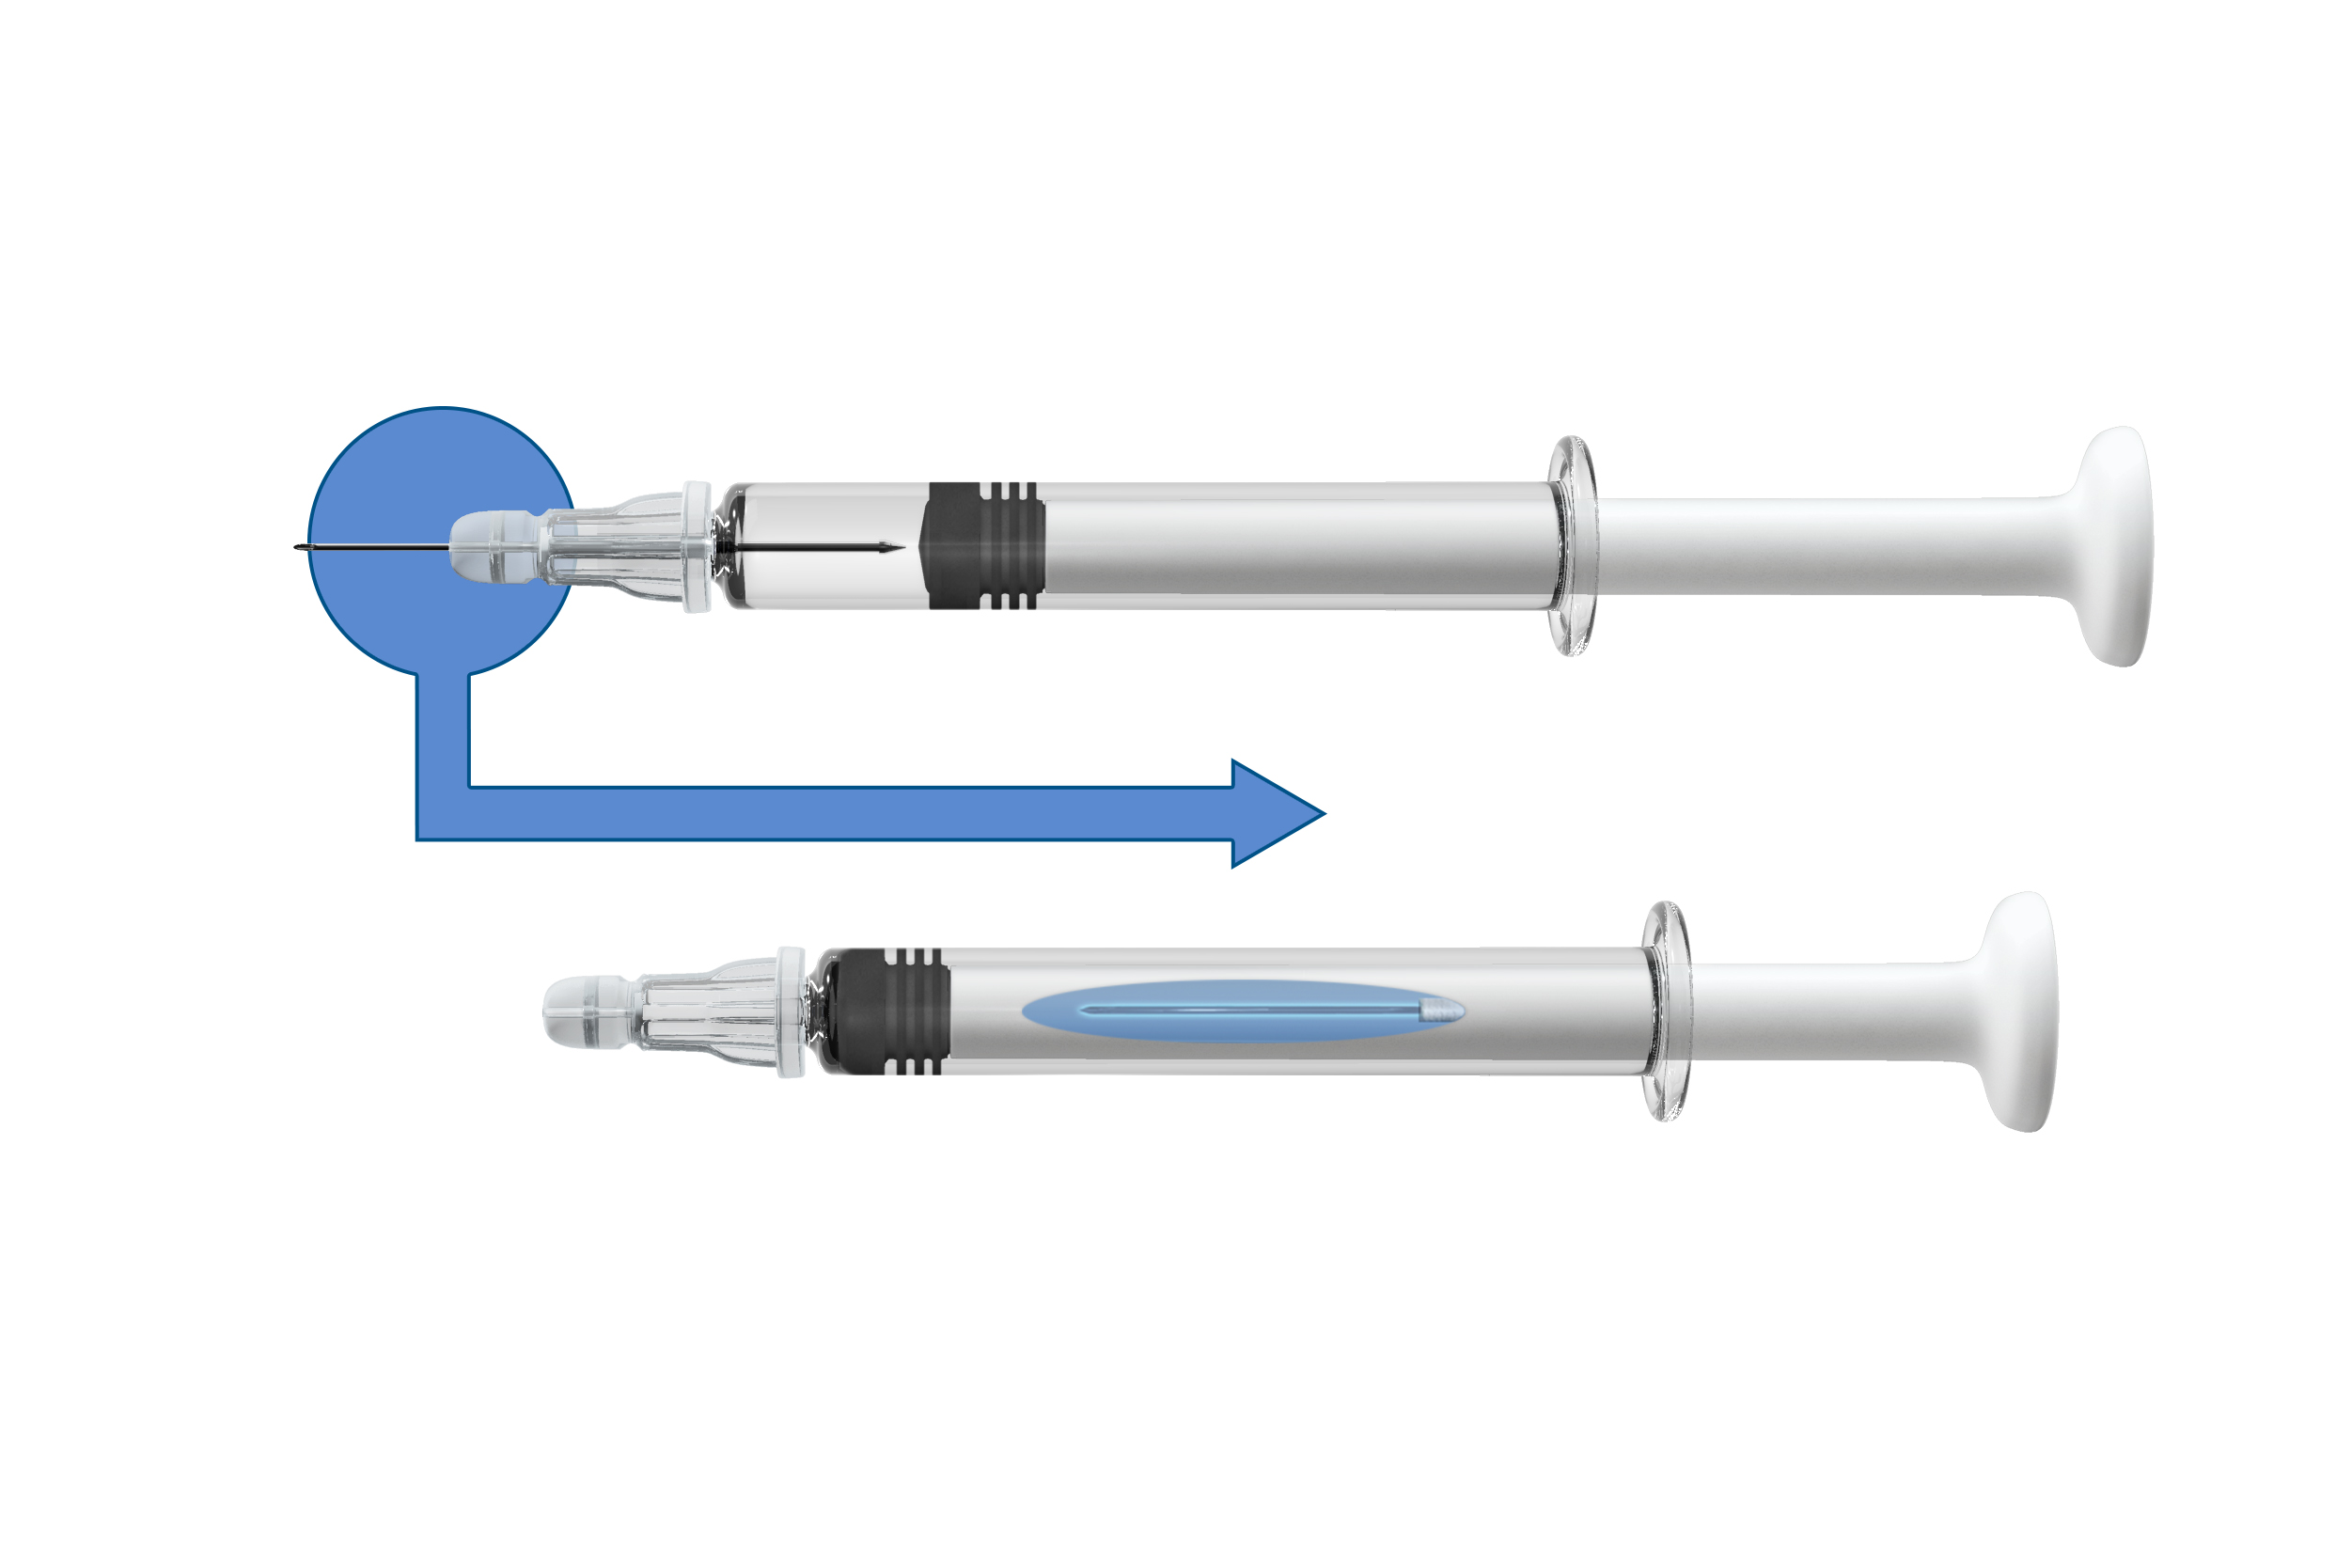 Figure 3: Credence’s proprietary Needle-Retraction Technology is an optional feature.